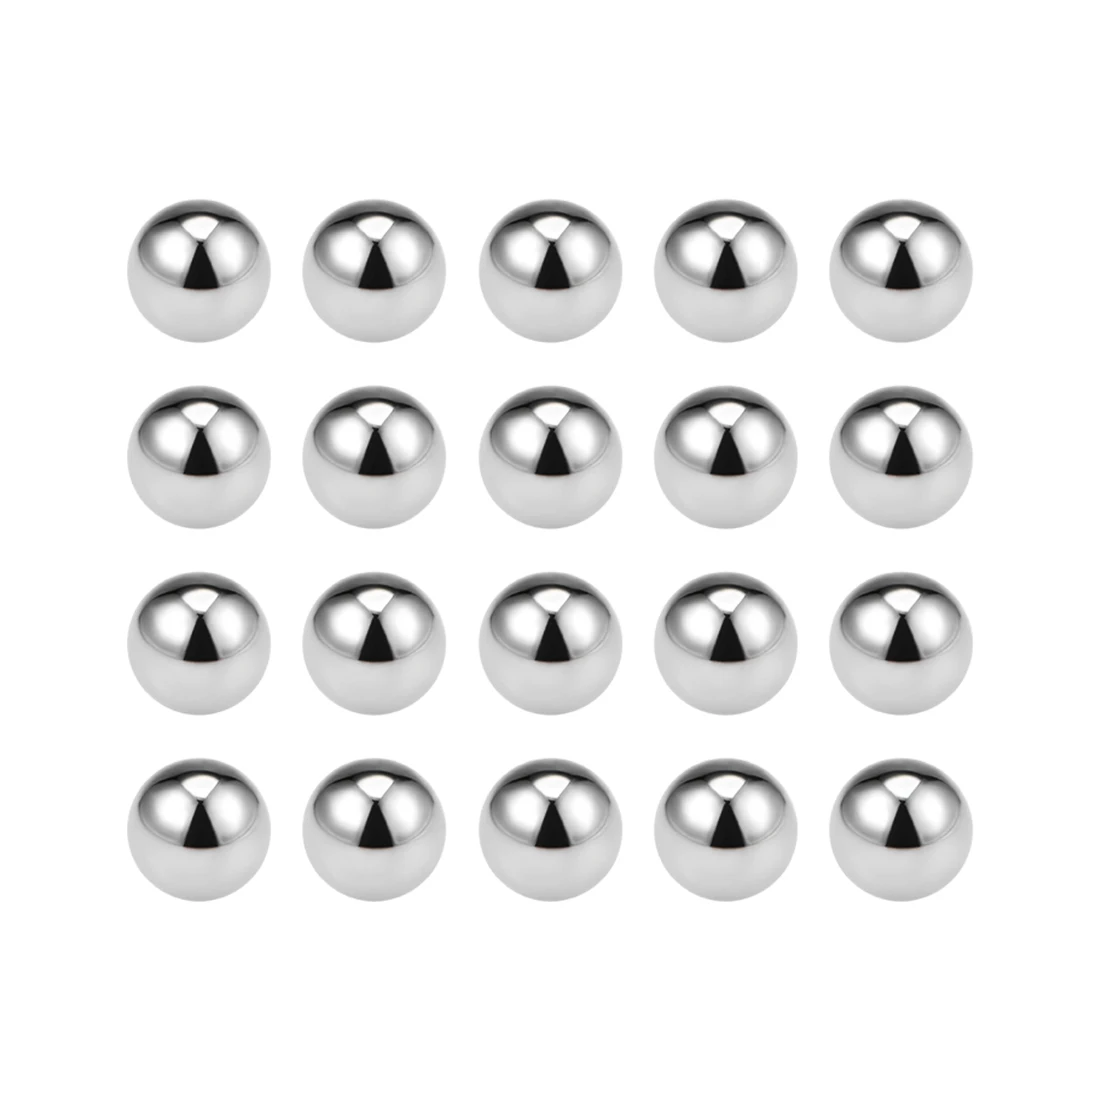 

X Autohaux Precision Balls 3mm Solid Chrome Steel G25 for Ball Bearing Keychain Wheel 300pcs